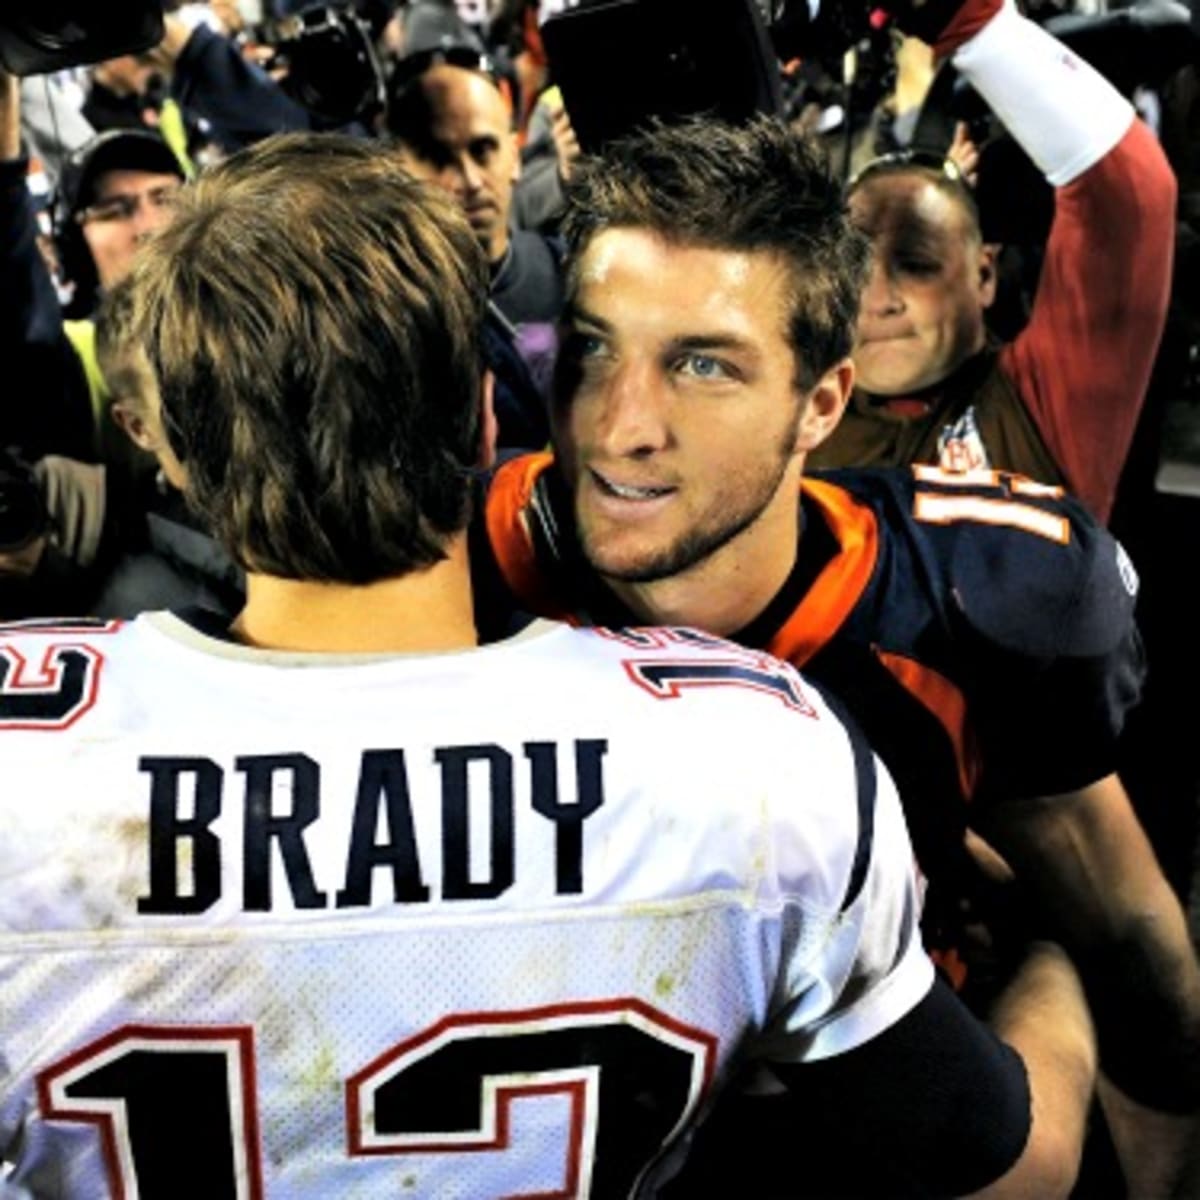 Video: Tom Brady shared concern for Aaron Hernandez with Tim Tebow in 2011  - Sports Illustrated